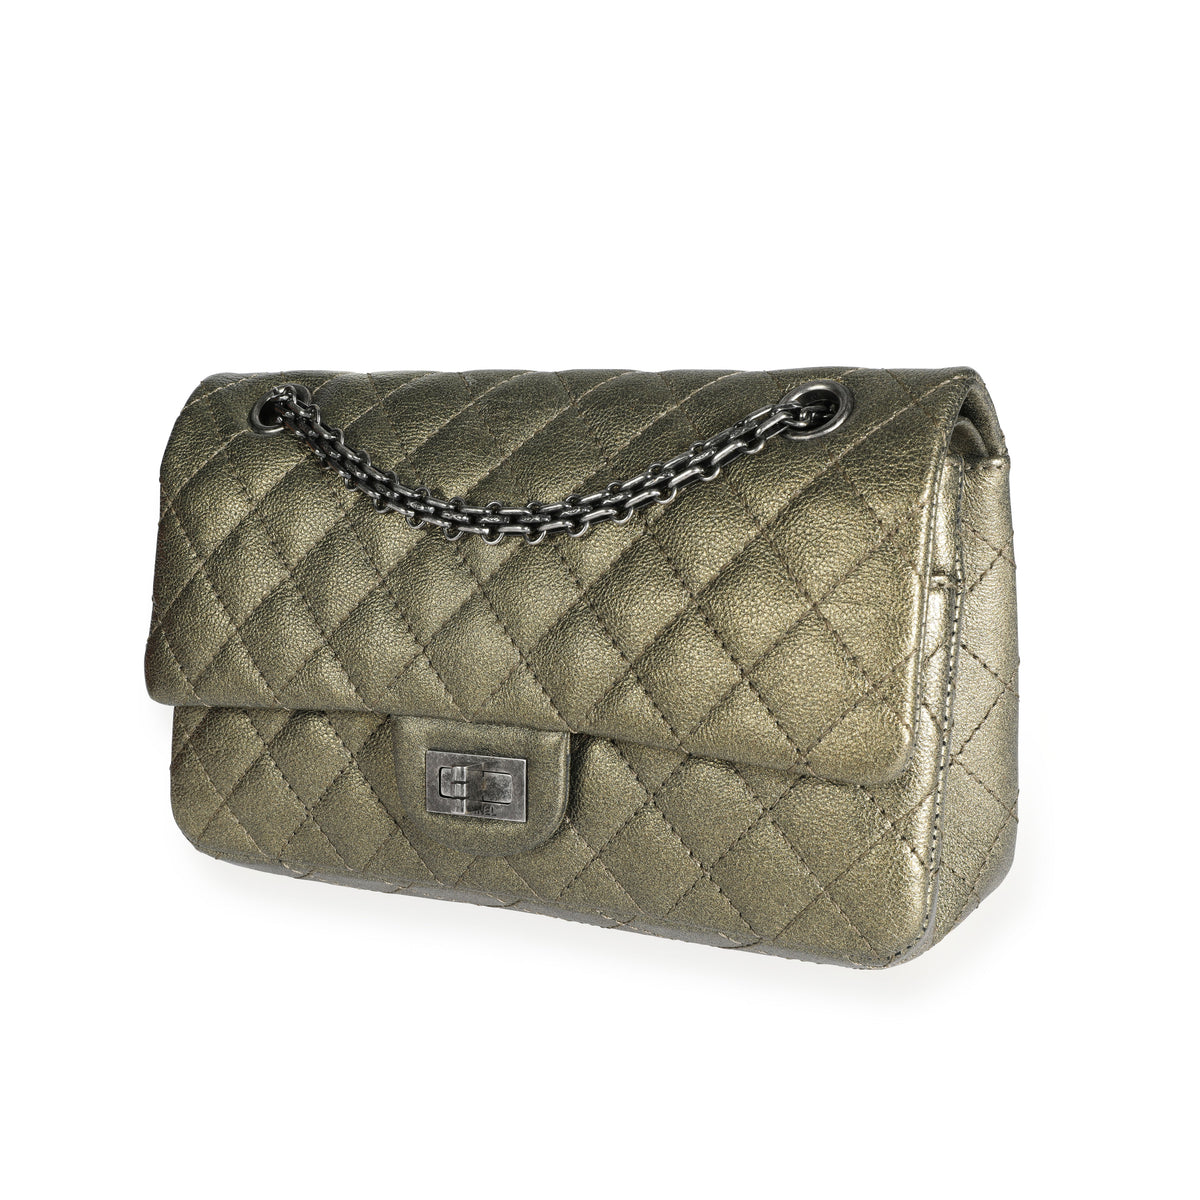 Chanel Gold Quilted Calfskin Reissue 2.55 225 Double Flap Bag